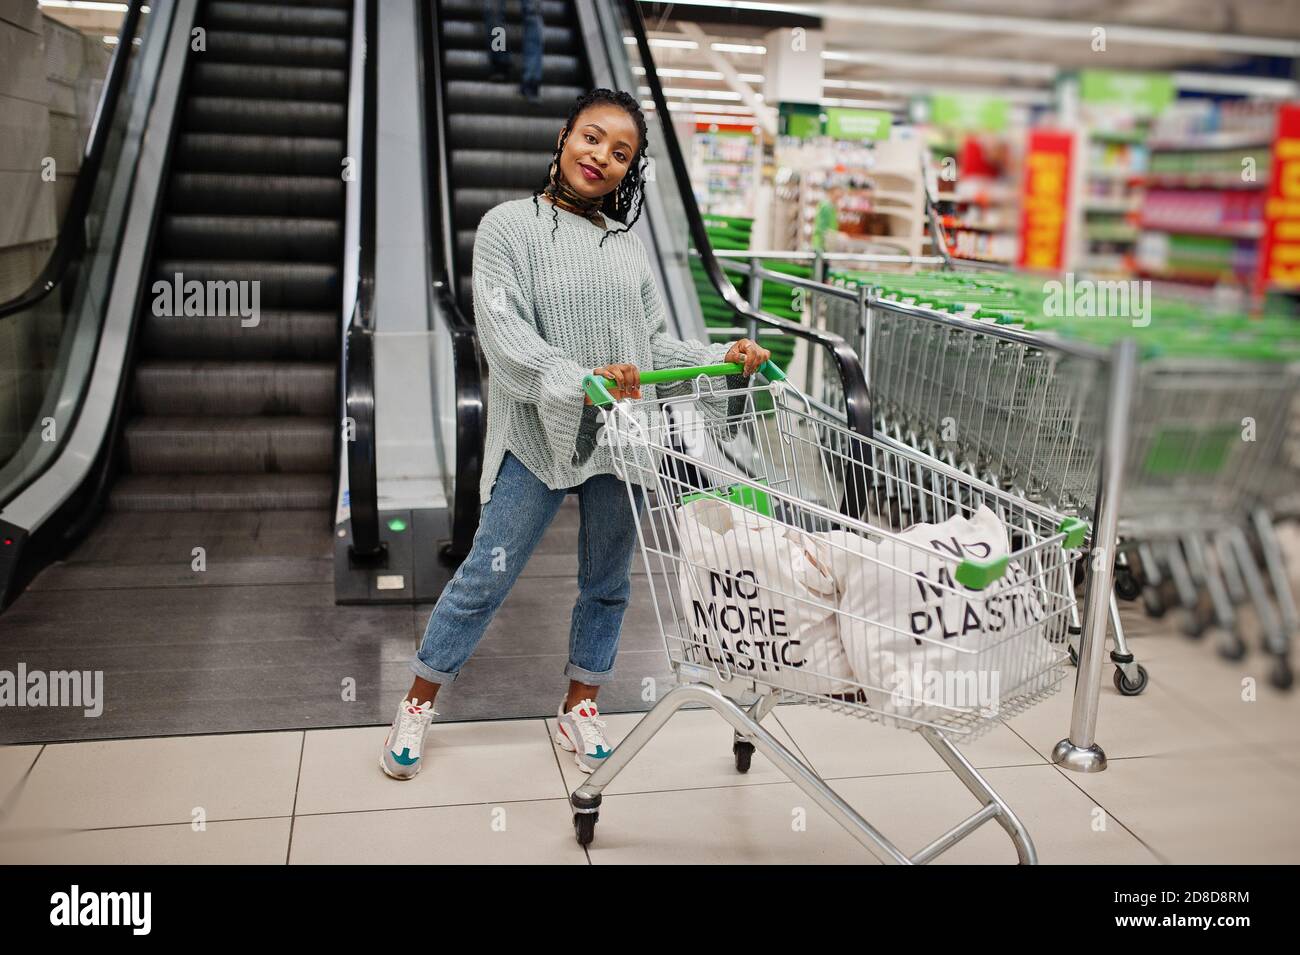 No more plastic. African woman with shopping cart trolley posed at supermarket against escalator stairs. Stock Photo